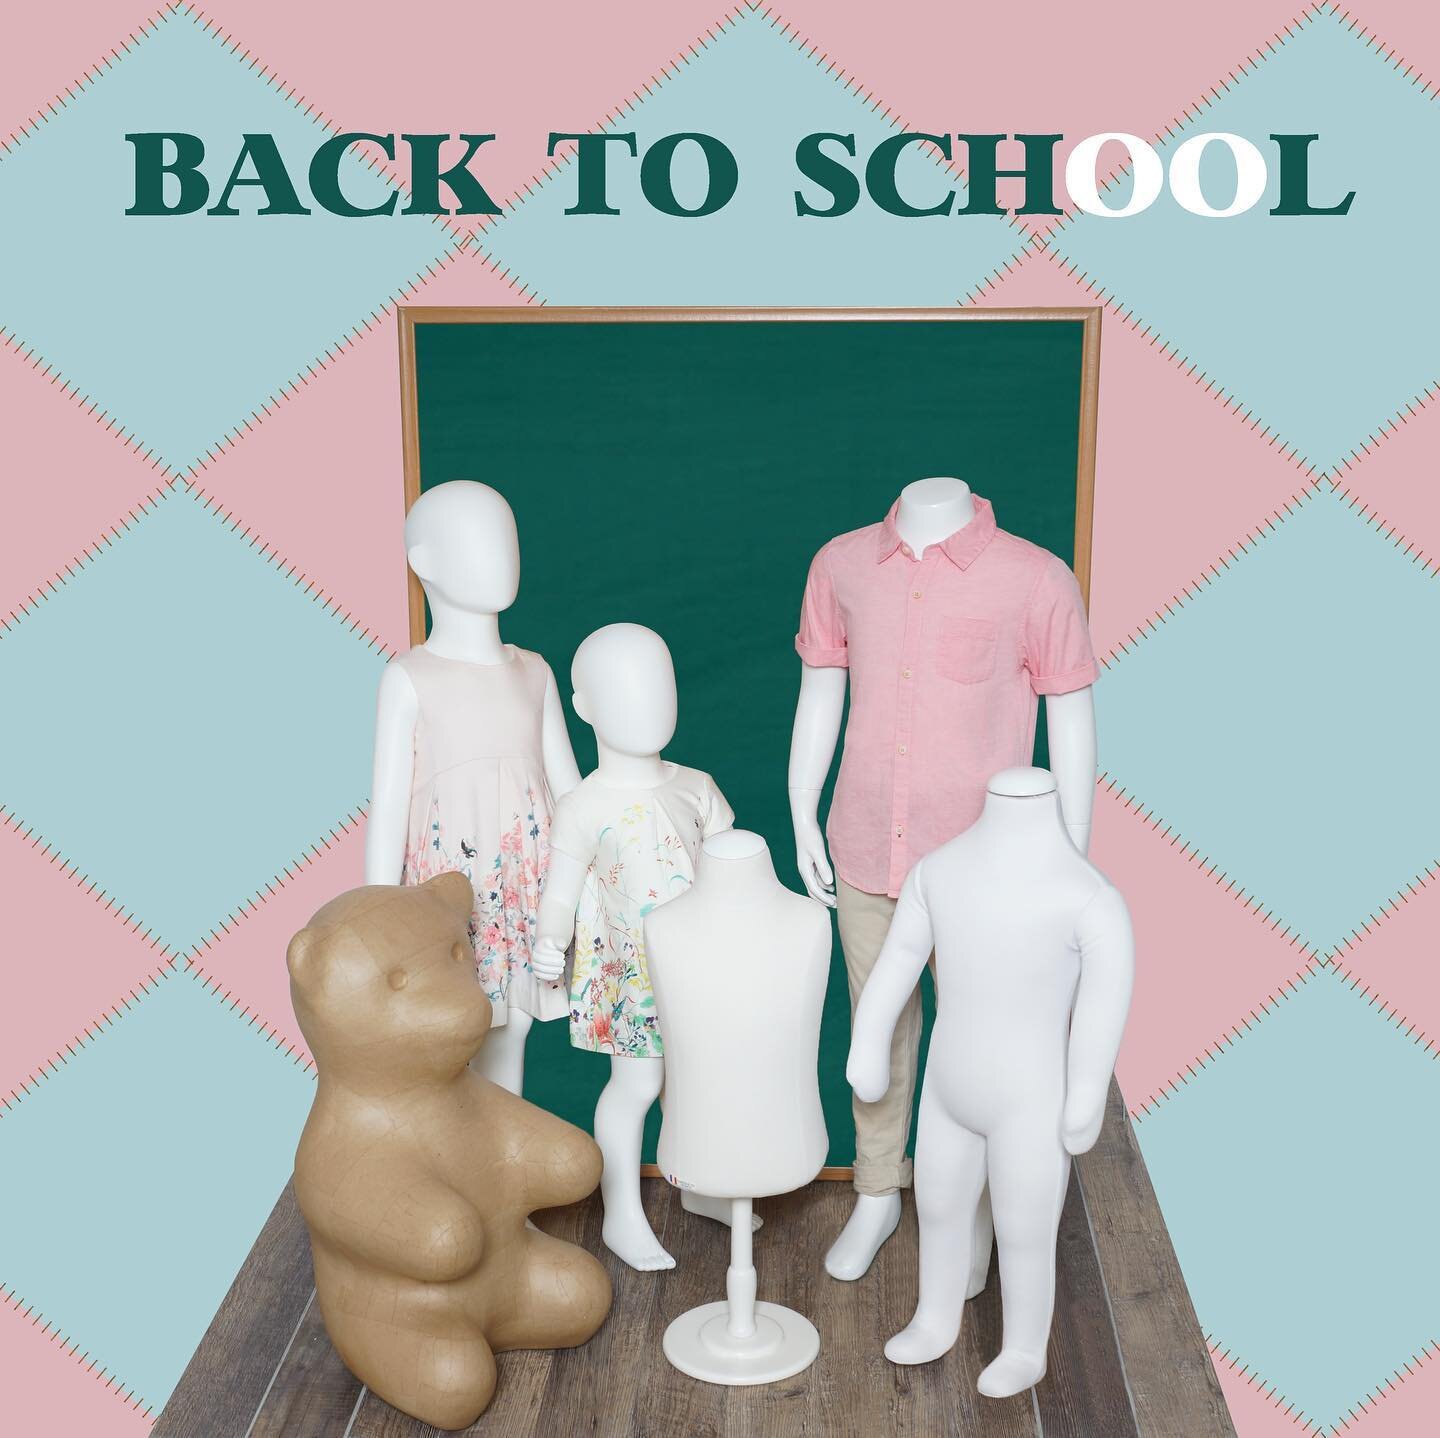 Ready to get back to school?📚✏️
Display your collections with us!
We have various range of kids collection regarding to ages, genders and sizes!
👶👧🧒👦
Custom options also available.
.
.
.
#mannequin #kidsmagazine #kidsfashion #backtoschool #backt